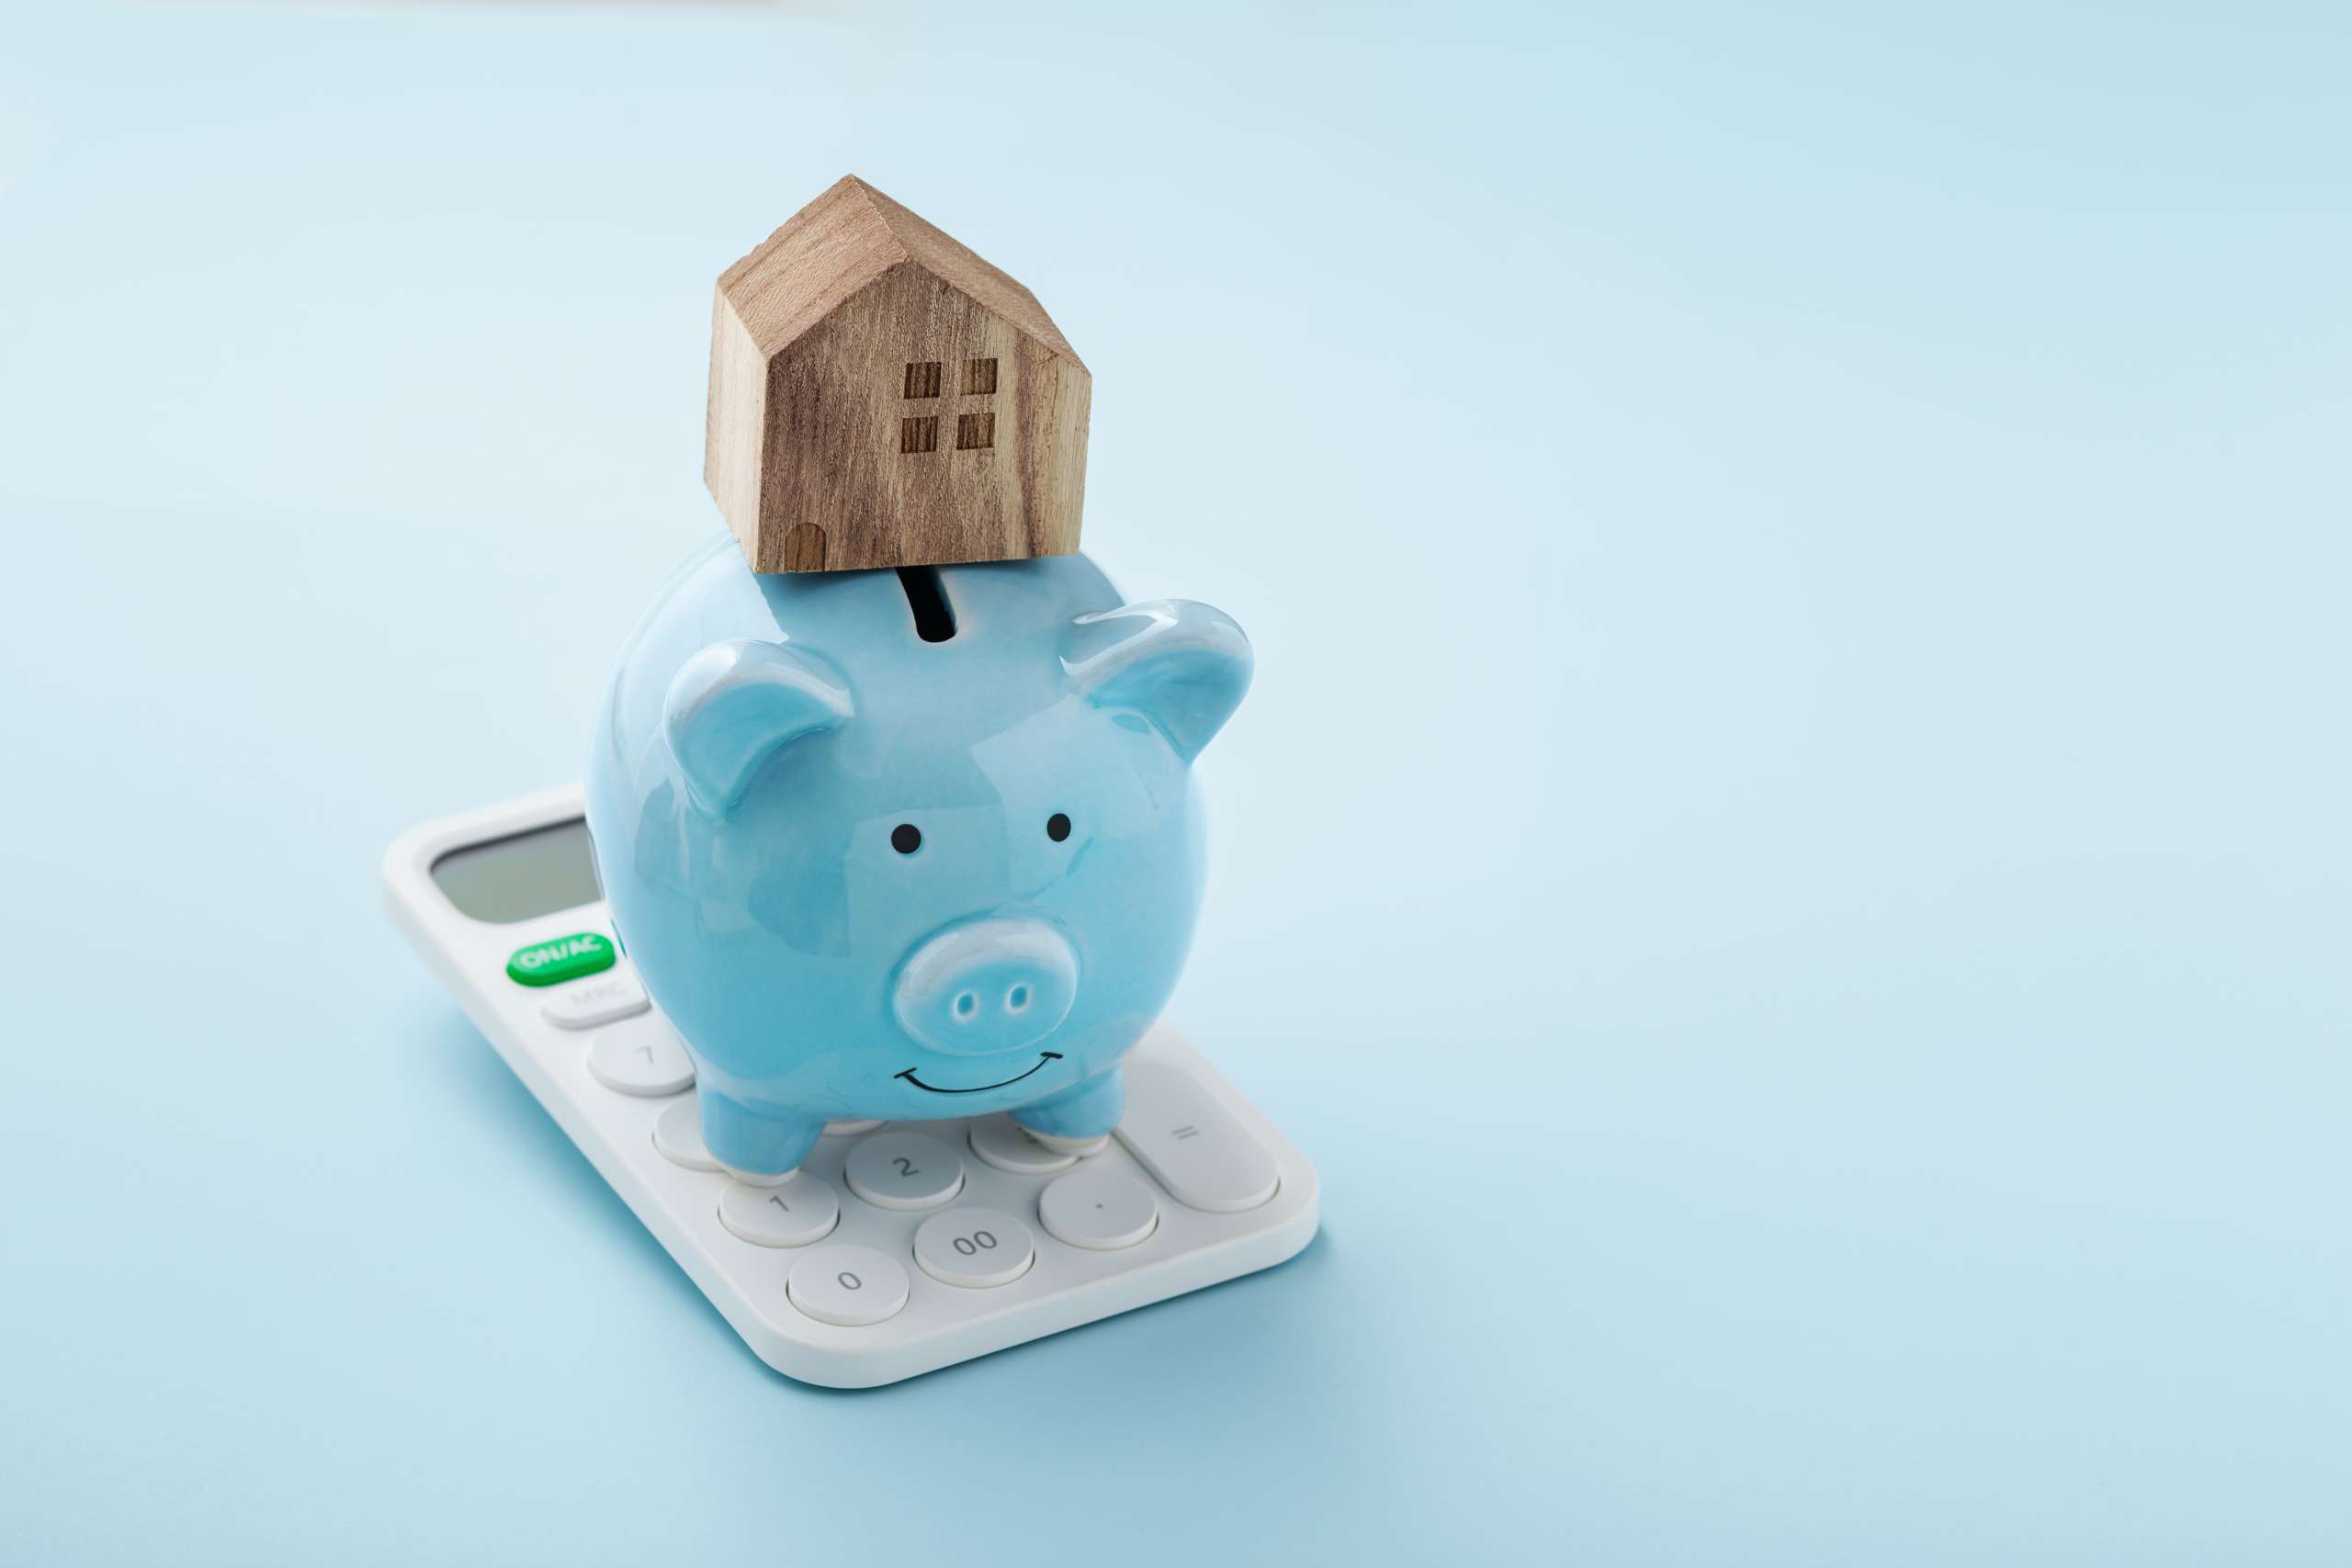 House on piggy bank and calculator on blue background with copy space